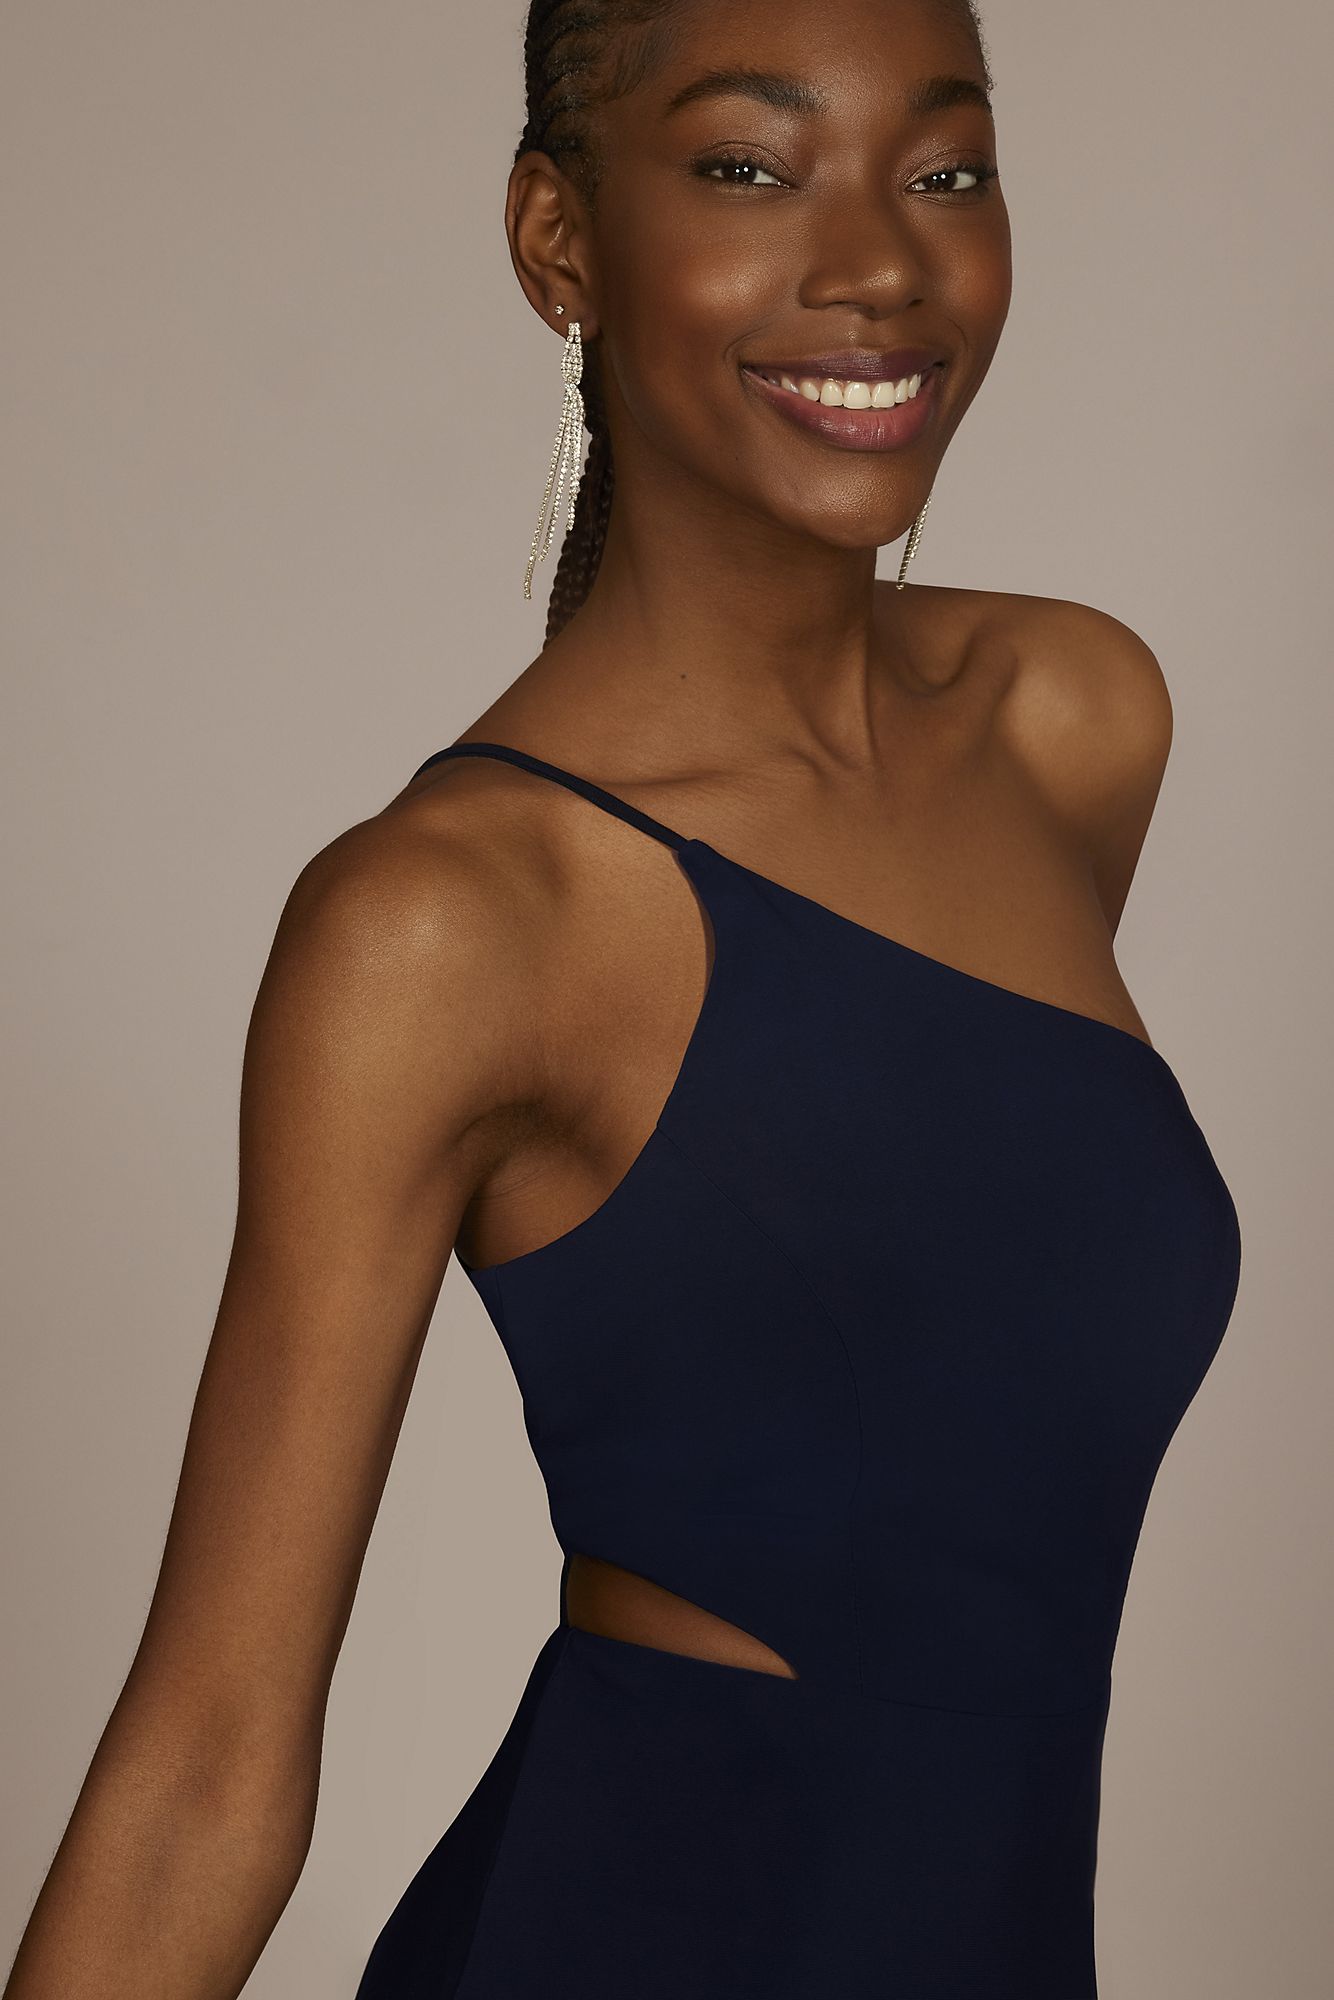 One Shoulder Jersey Gown with Cutout Jump 11078D